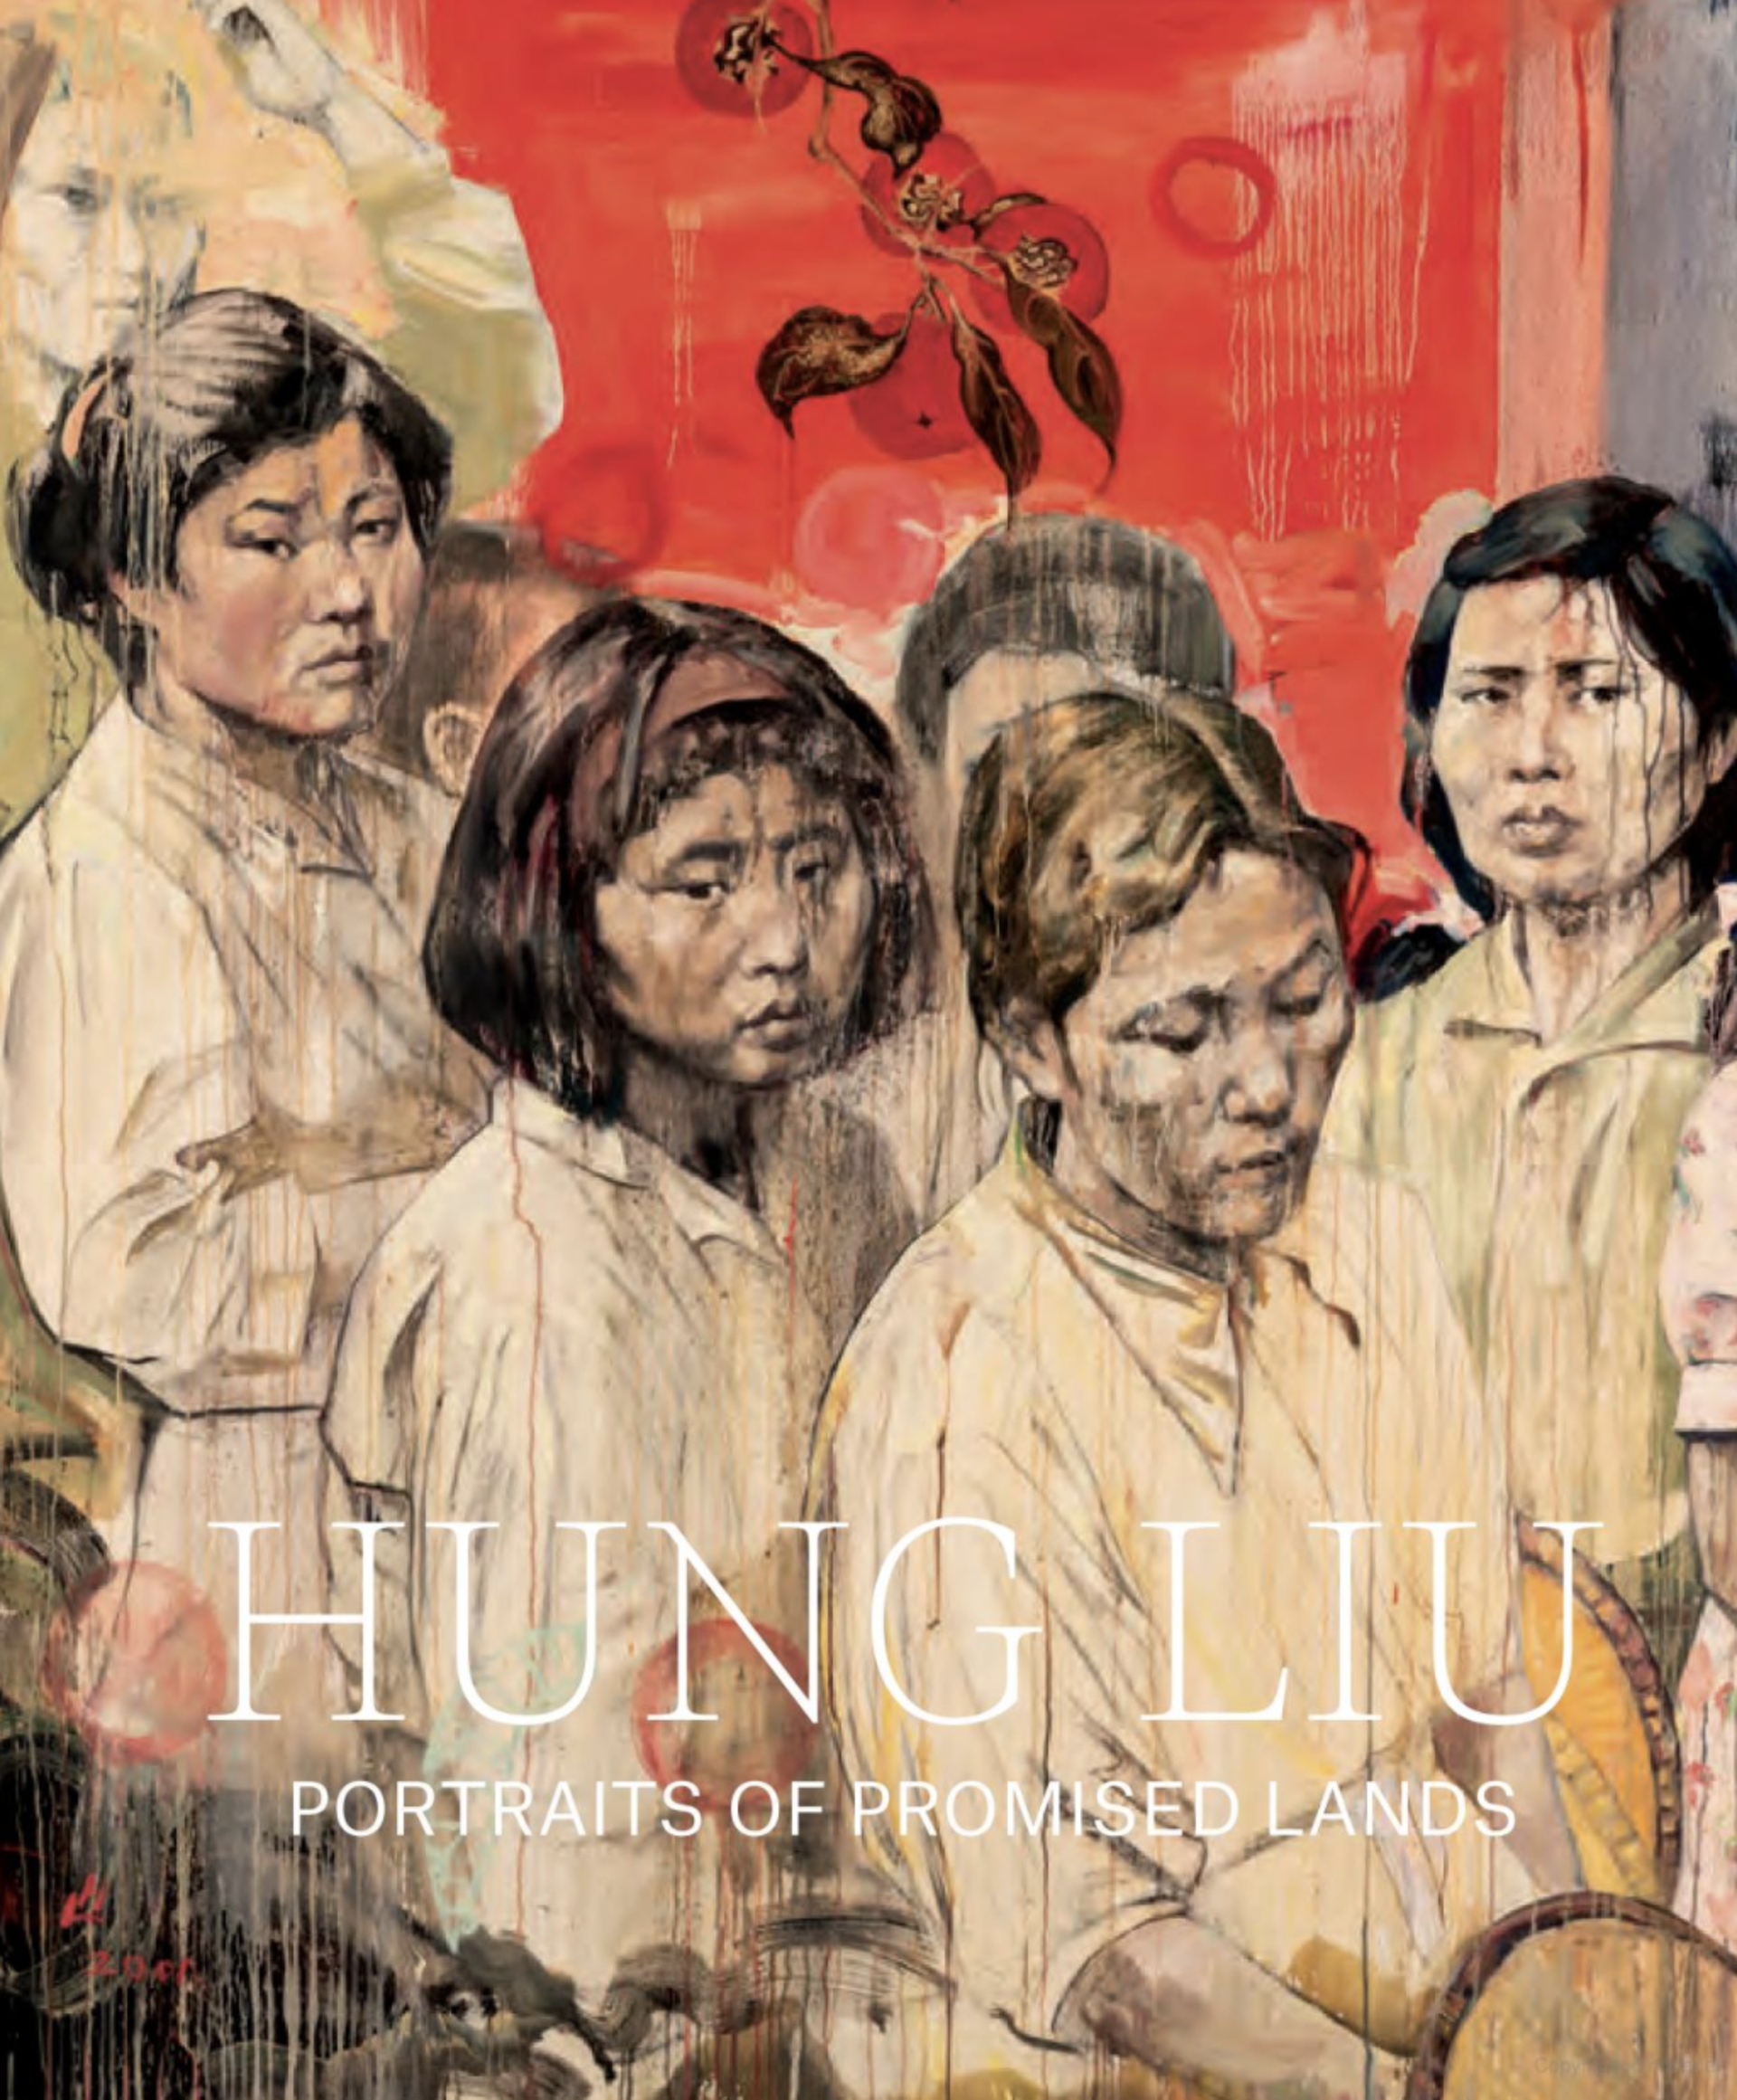 Hung Liu: Portraits of Promised Lands by Hung Liu